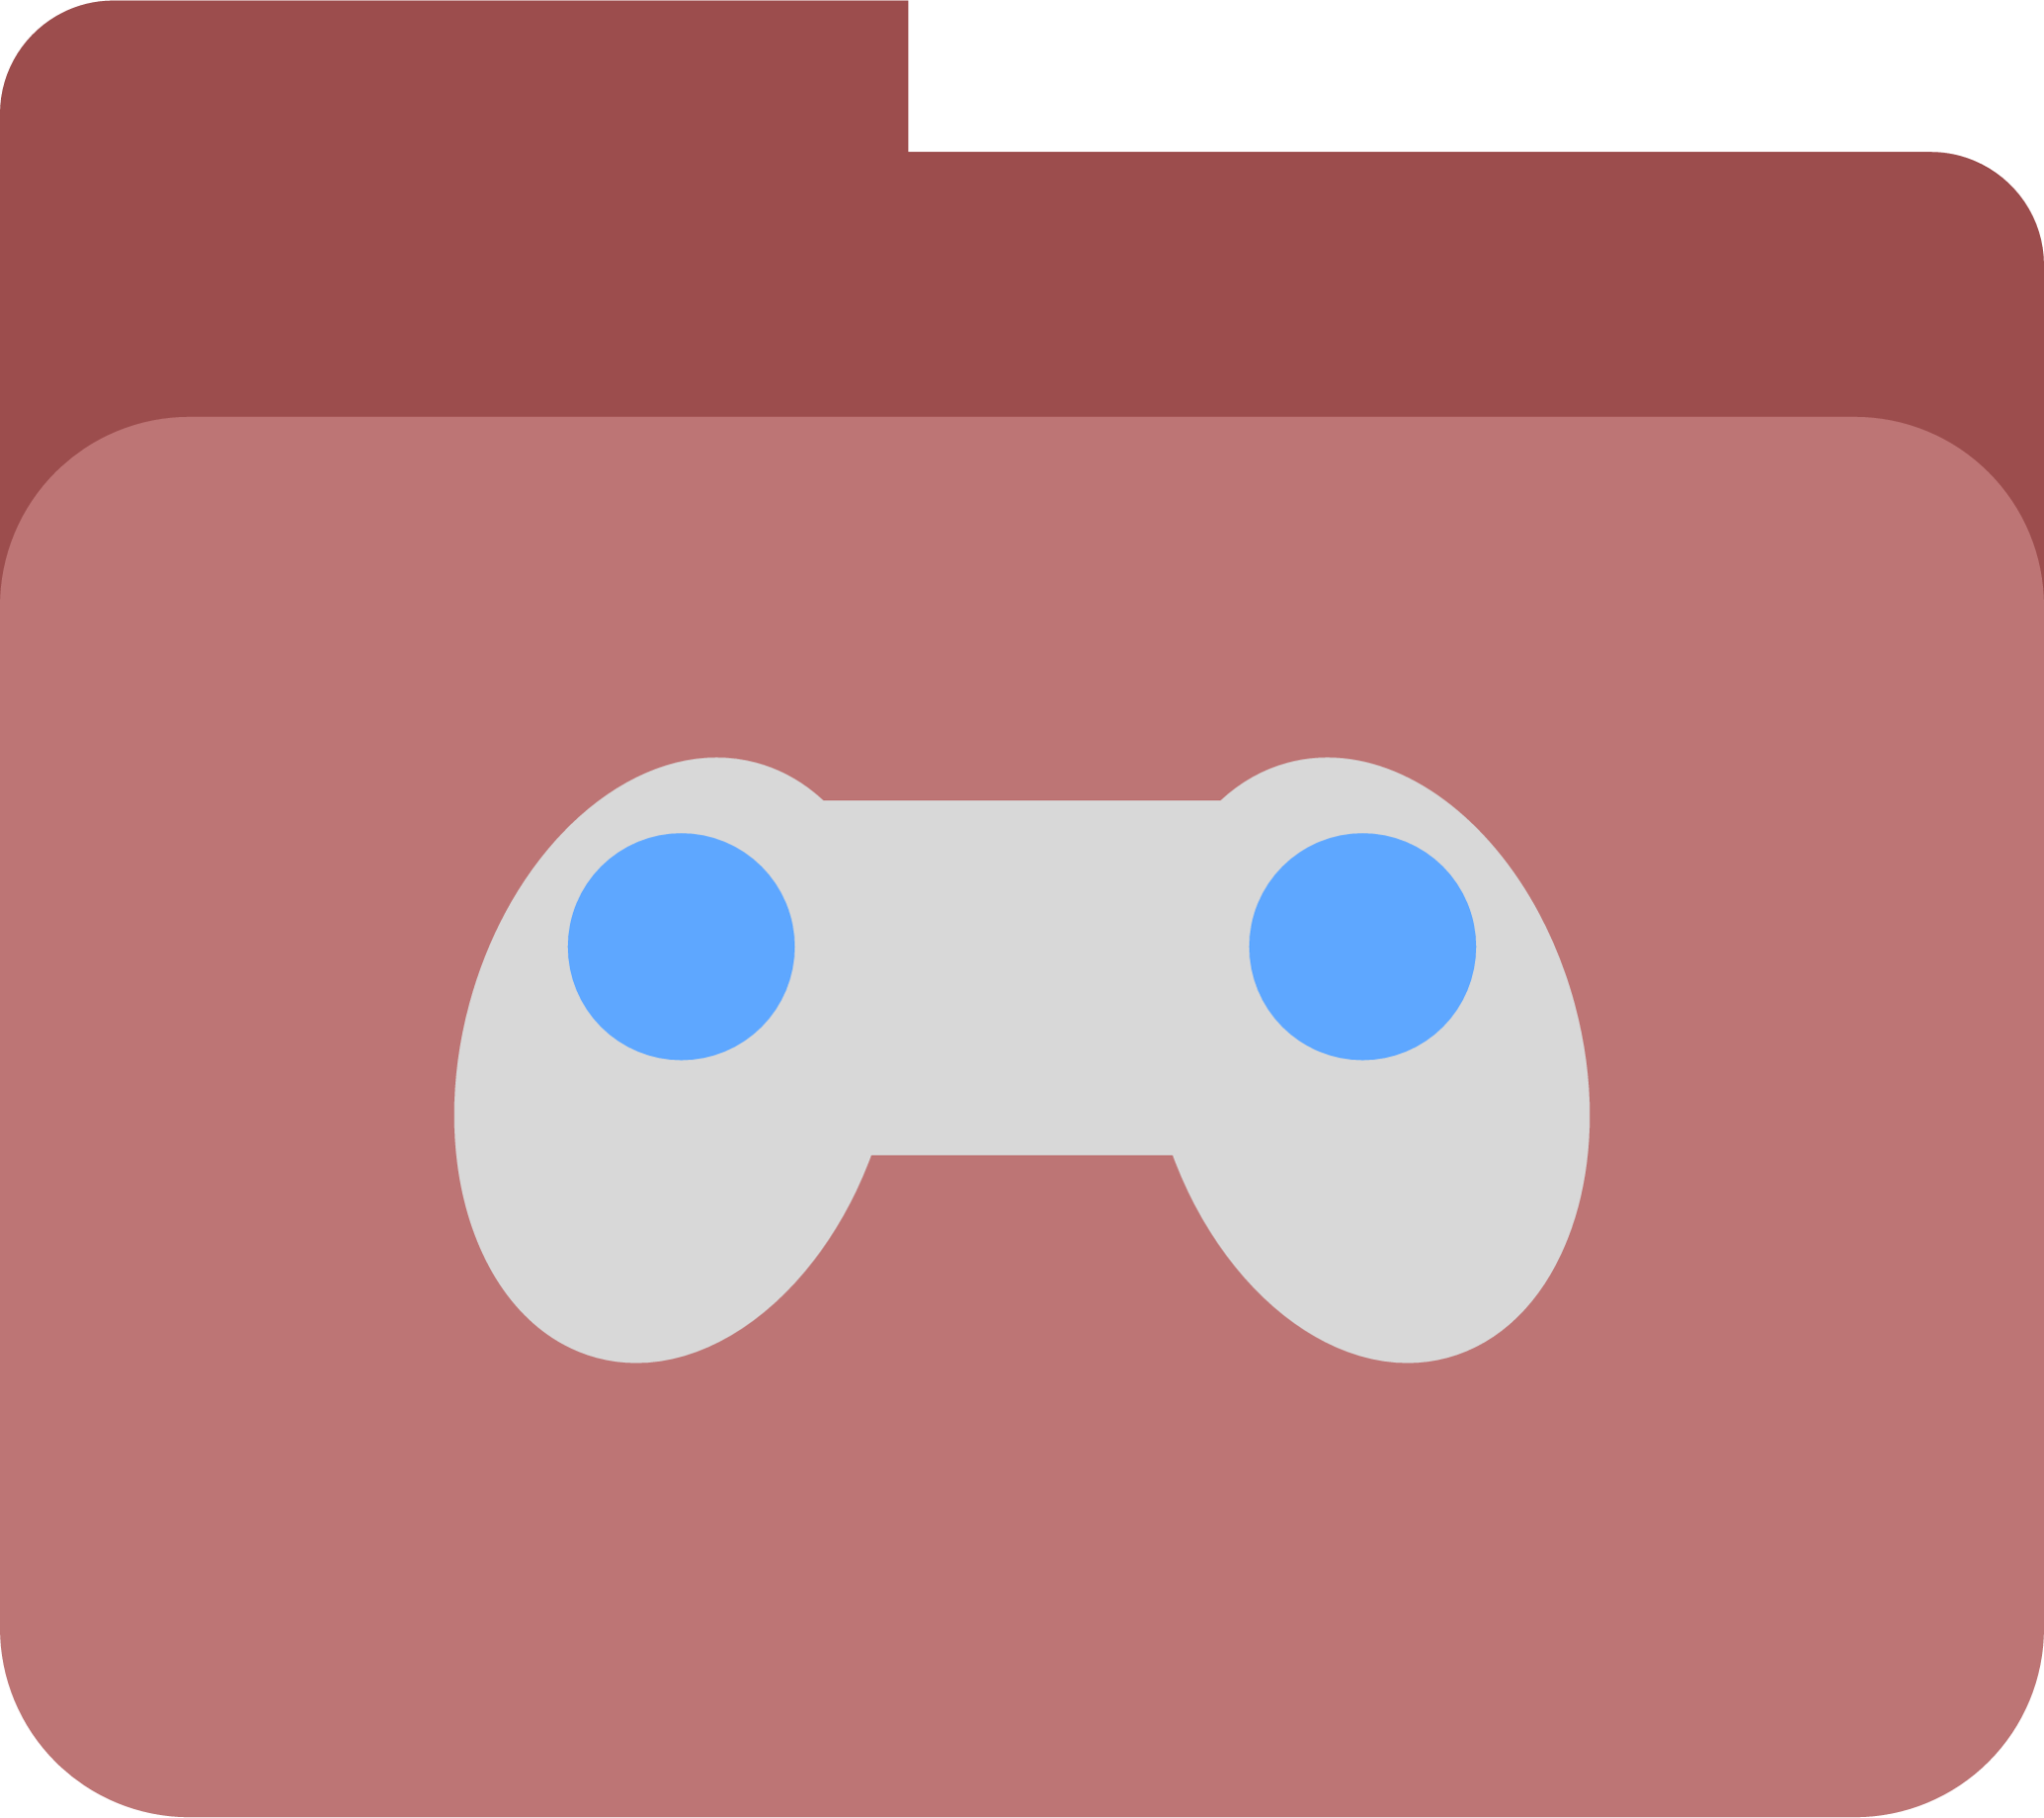 games folder" - Download for – Iconduck